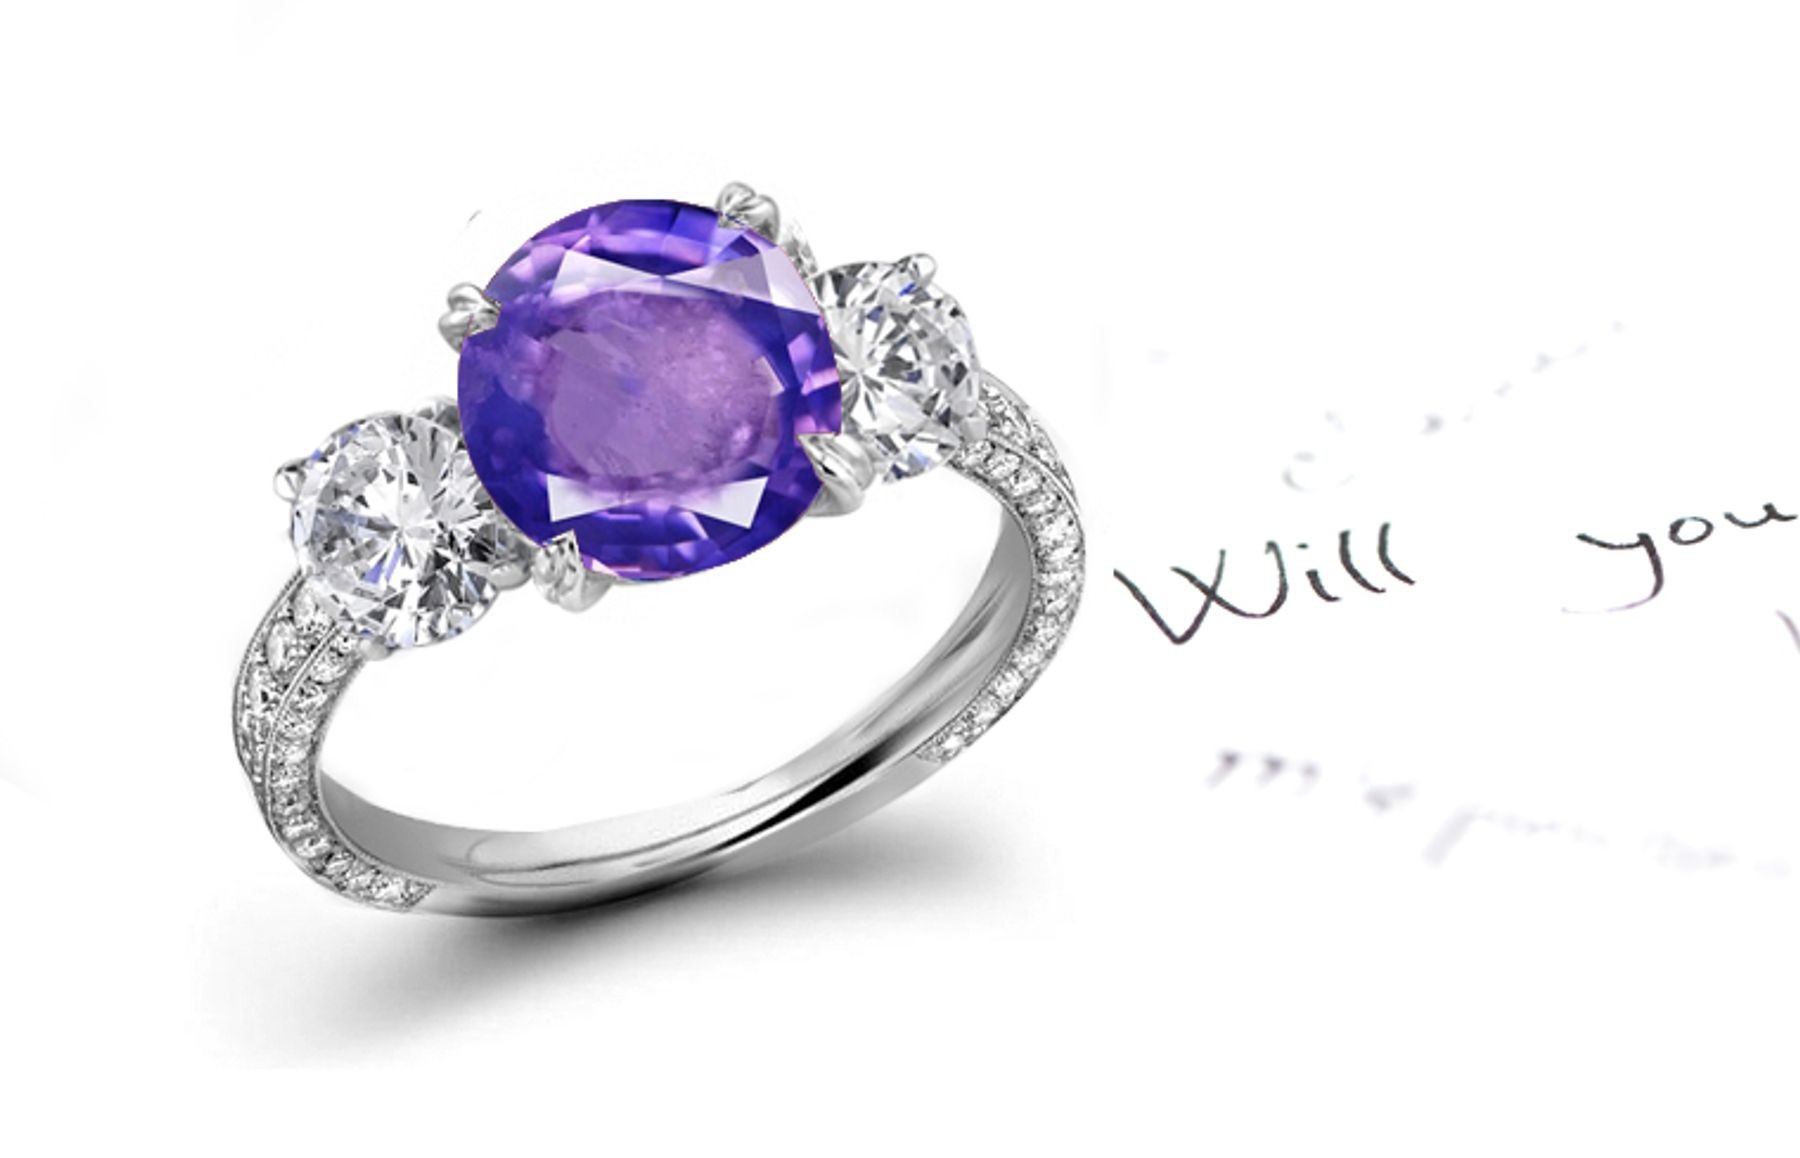 Dramatic: A Magnificent Blue Sapphire & White Diamond Micro Pave Ring